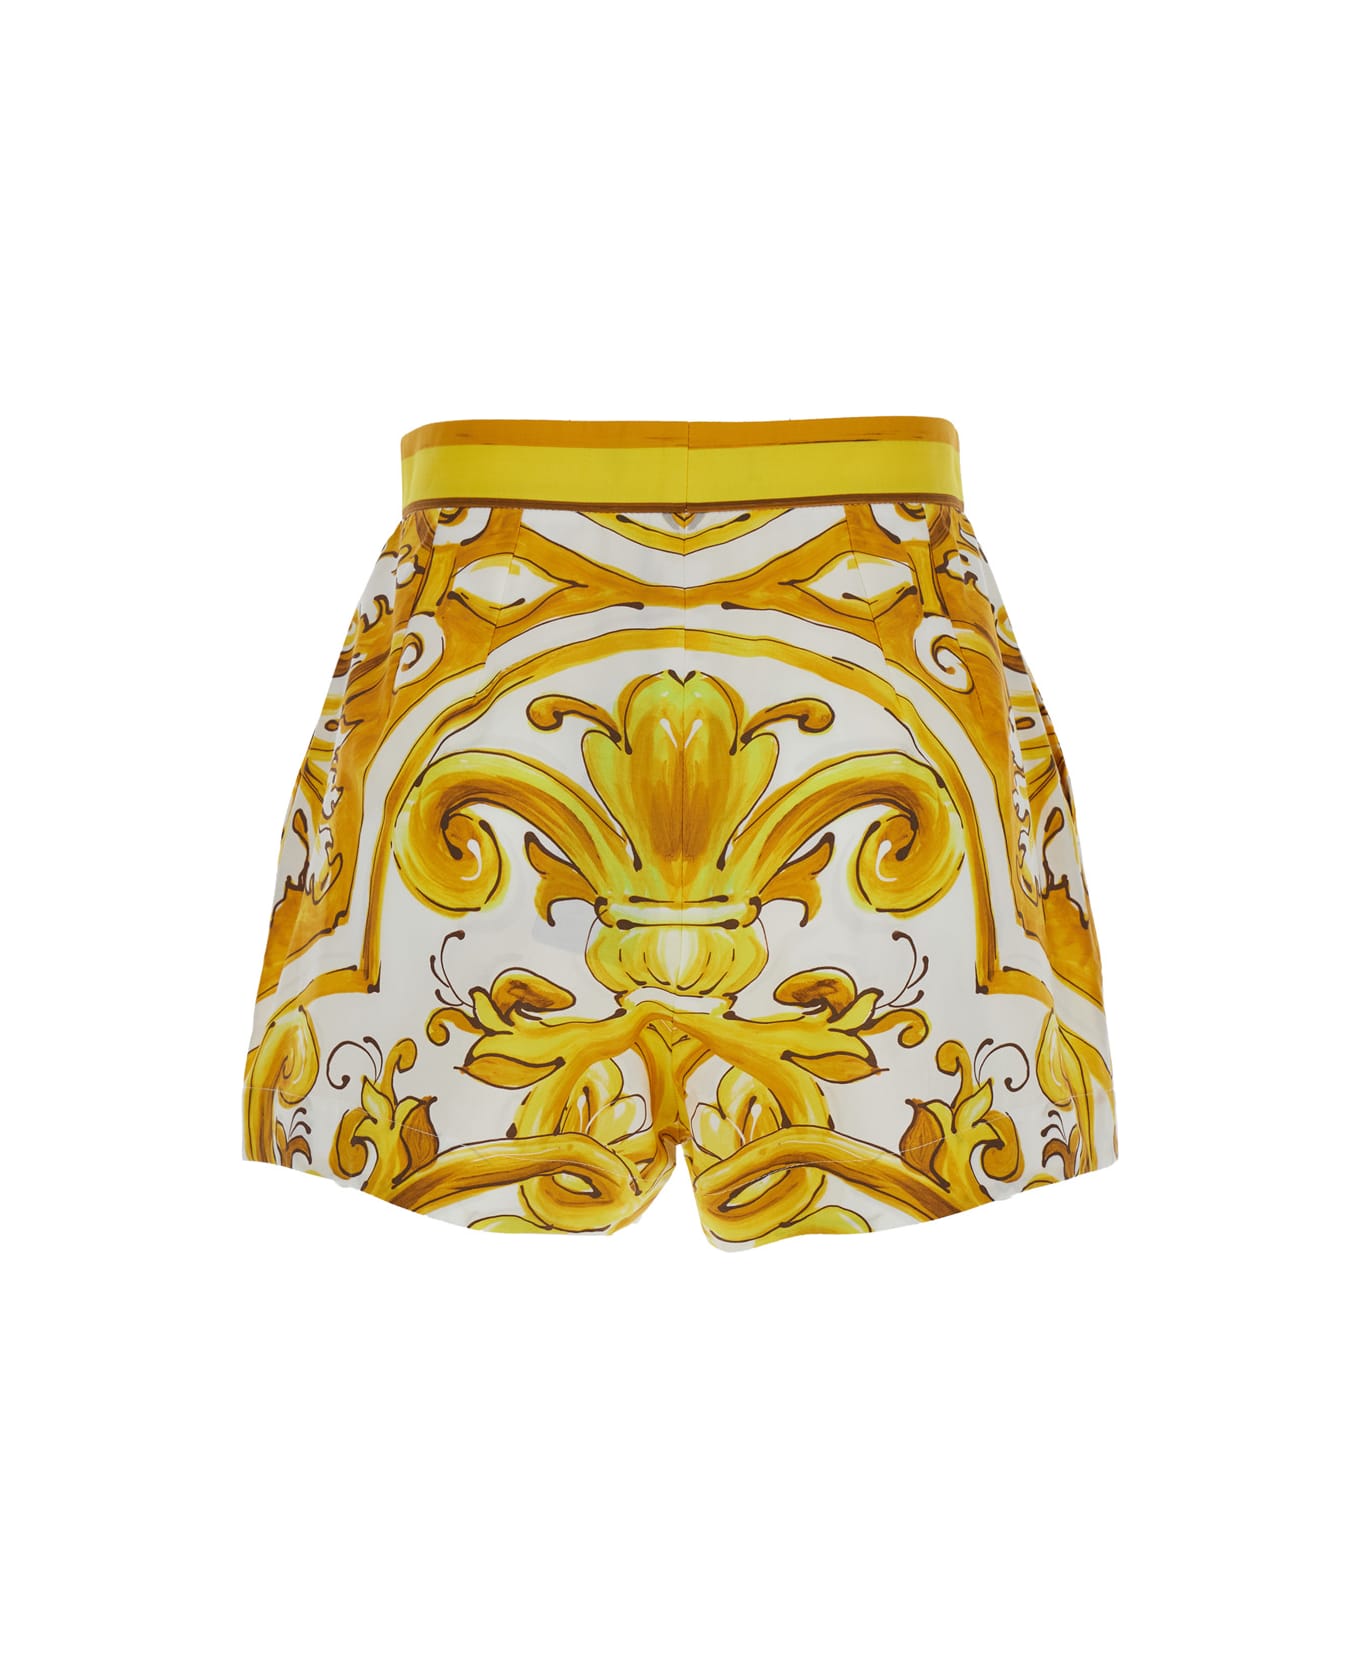 Dolce & Gabbana Yellow And White Short With Majolica Print In Cotton Woman - Yellow